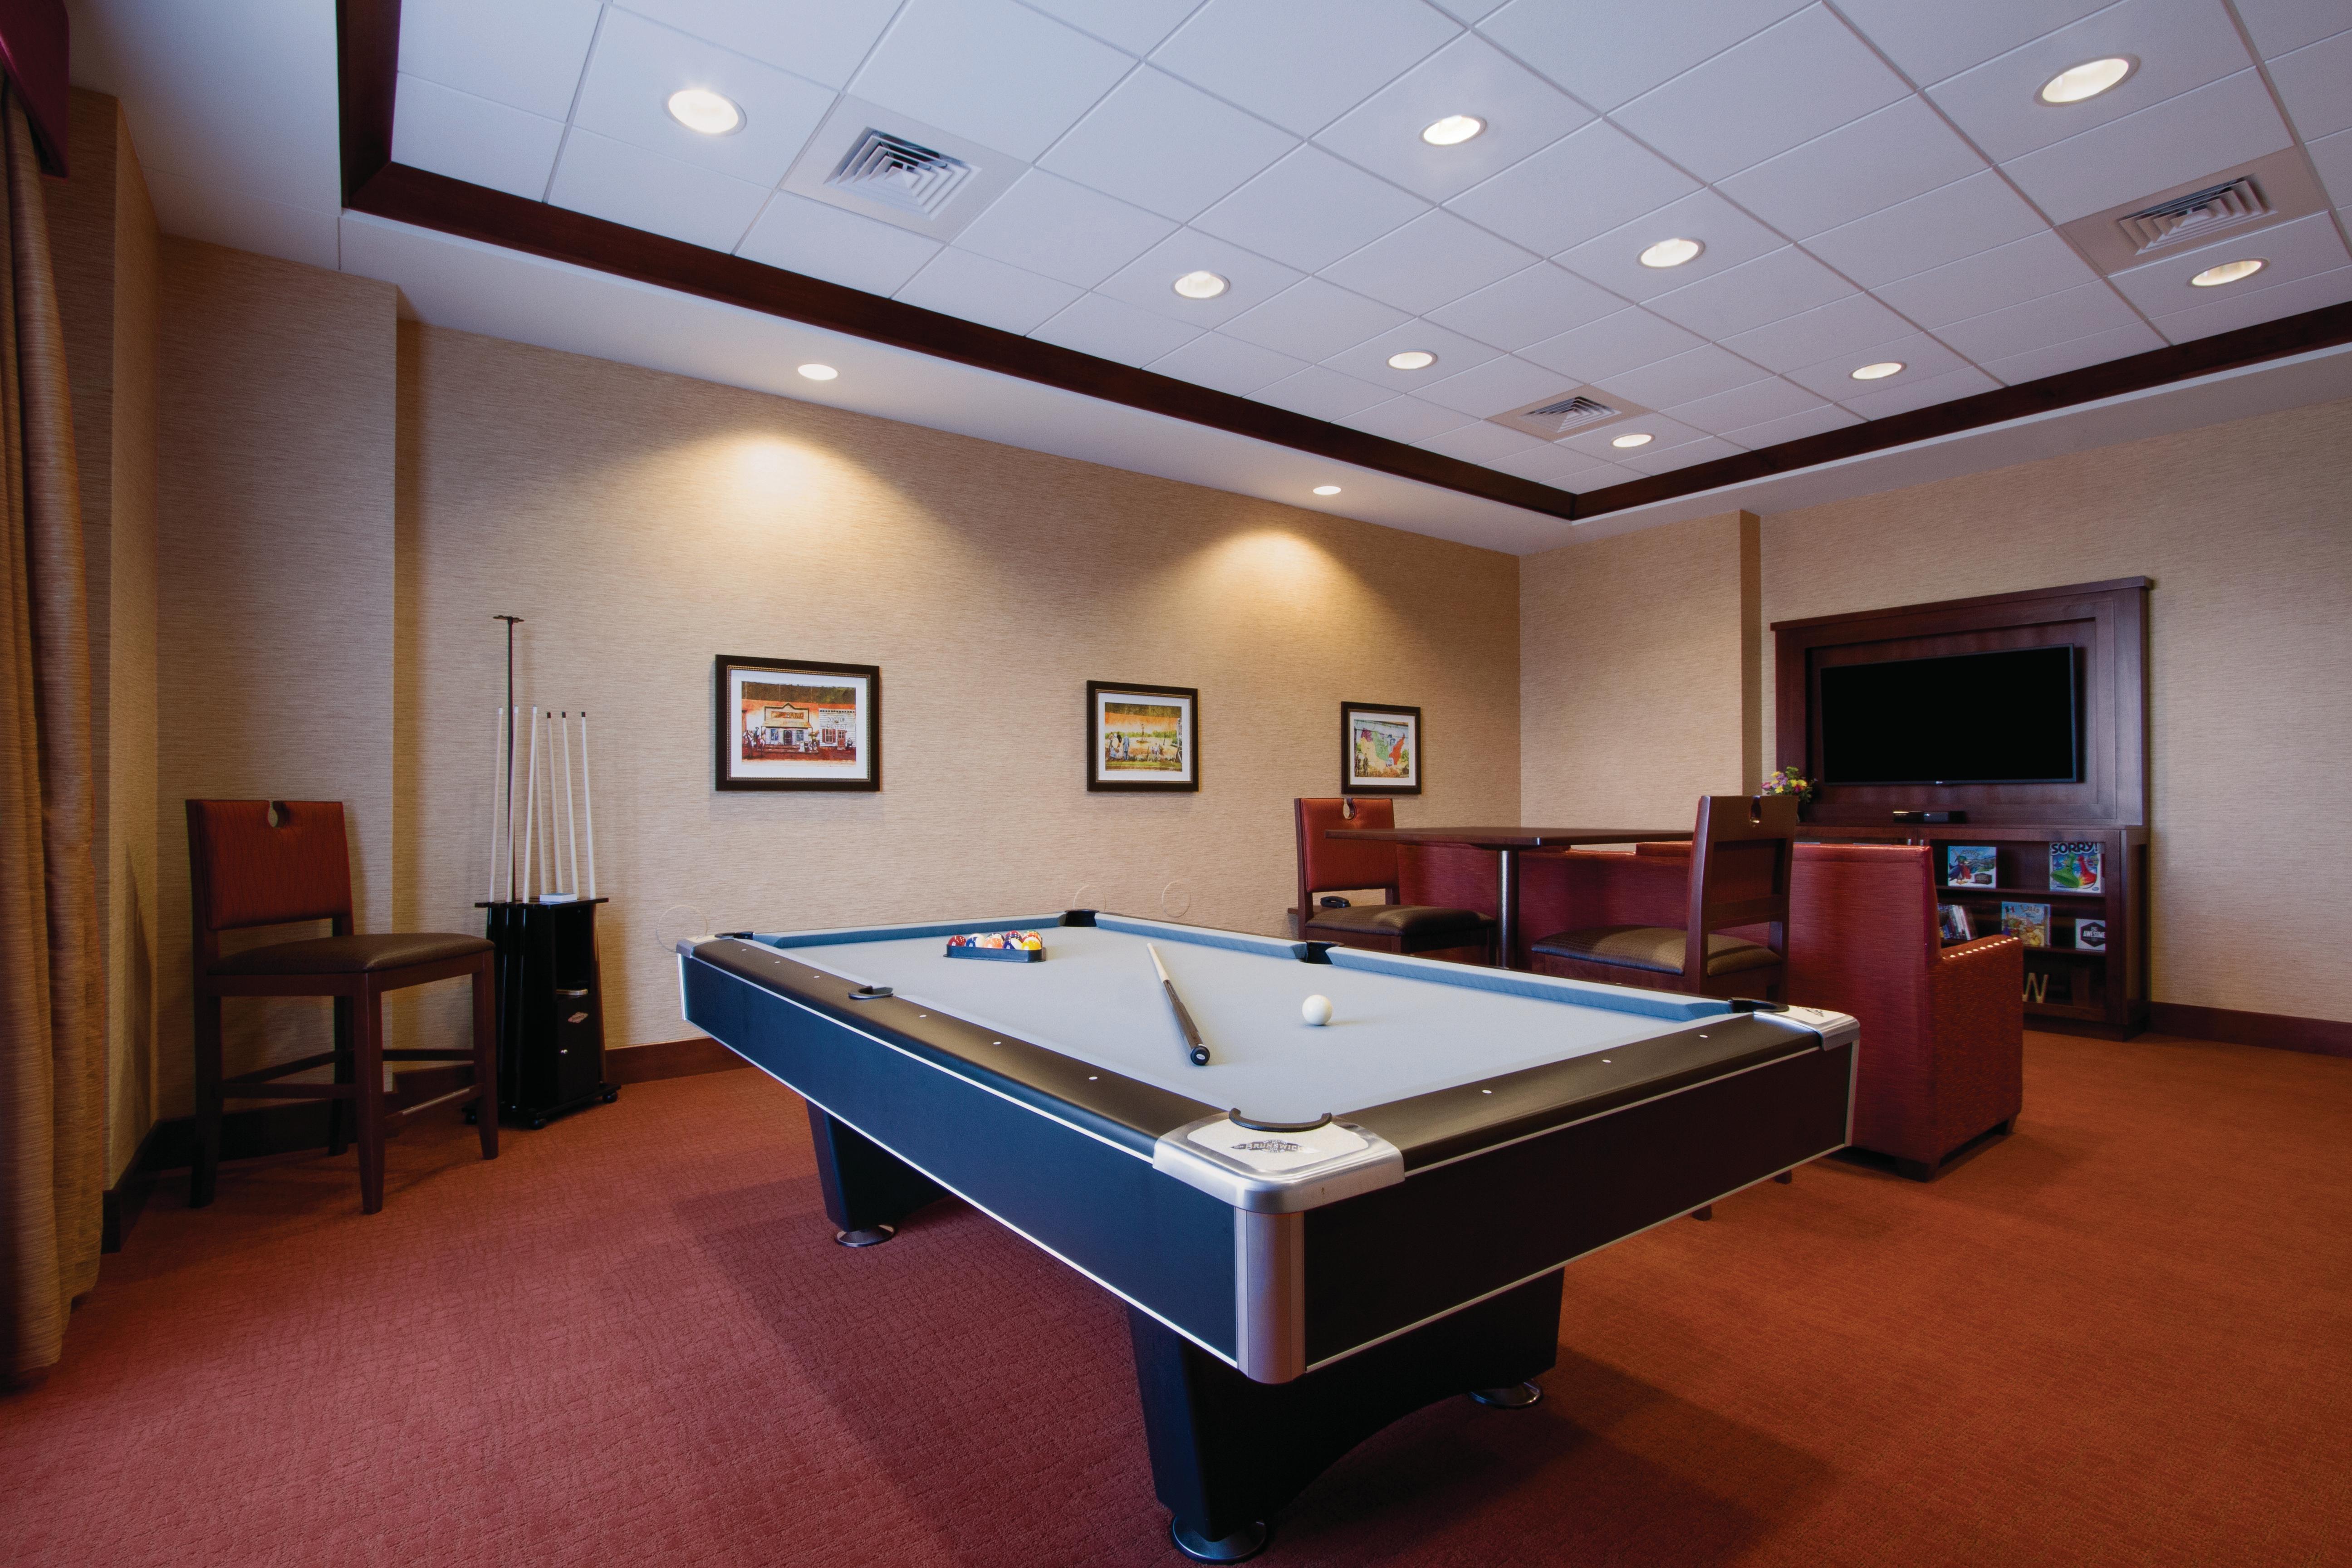 Game Room With Pool Table, Bar Style Seating, Sofa, TV and Wall Art